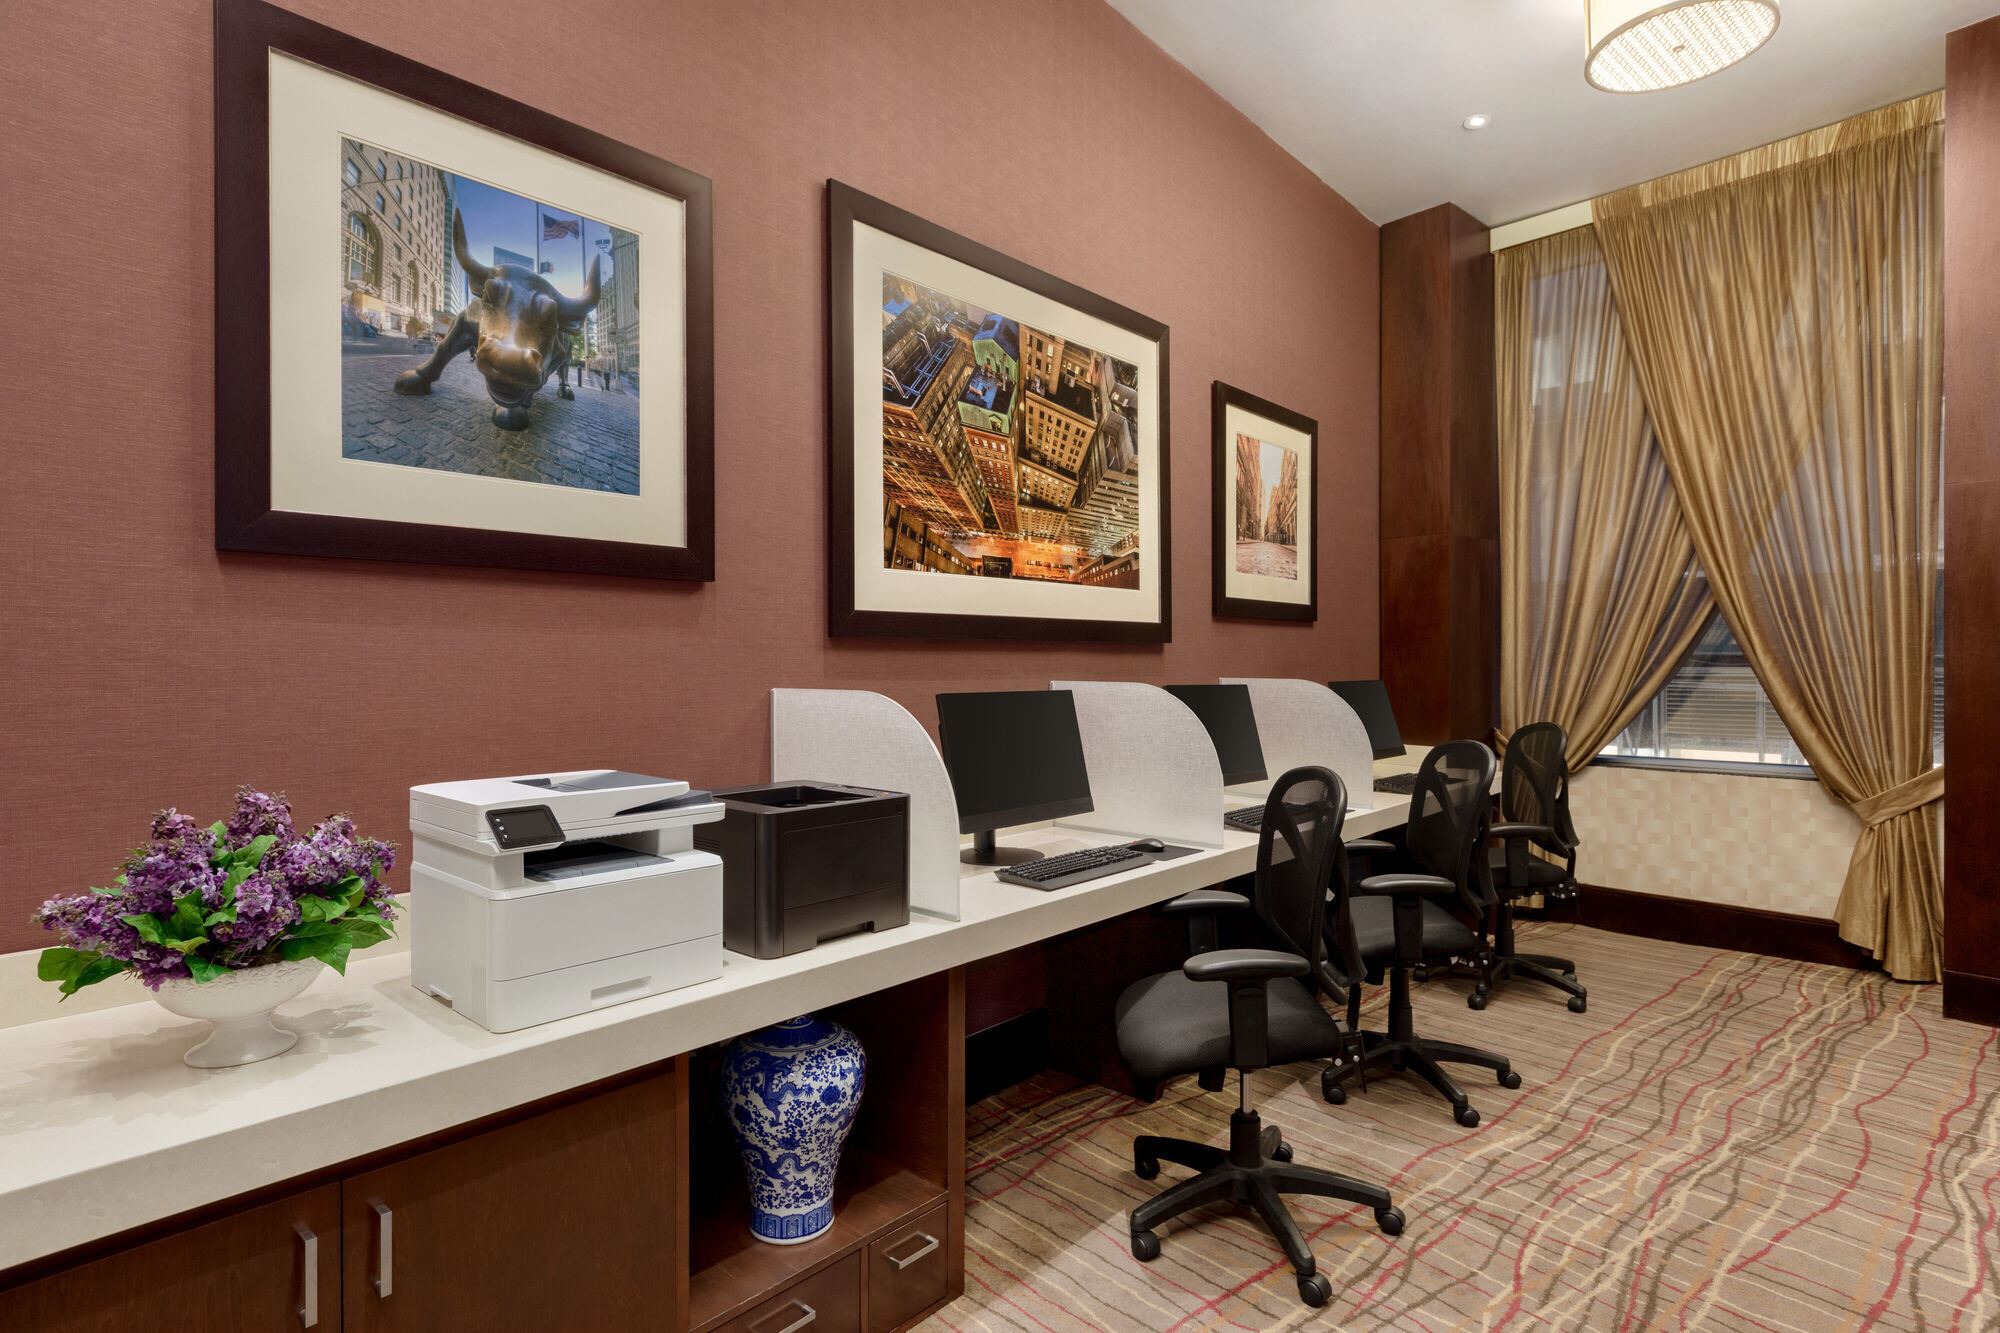 Doubletree By Hilton New York Downtown Hotell Fasiliteter bilde